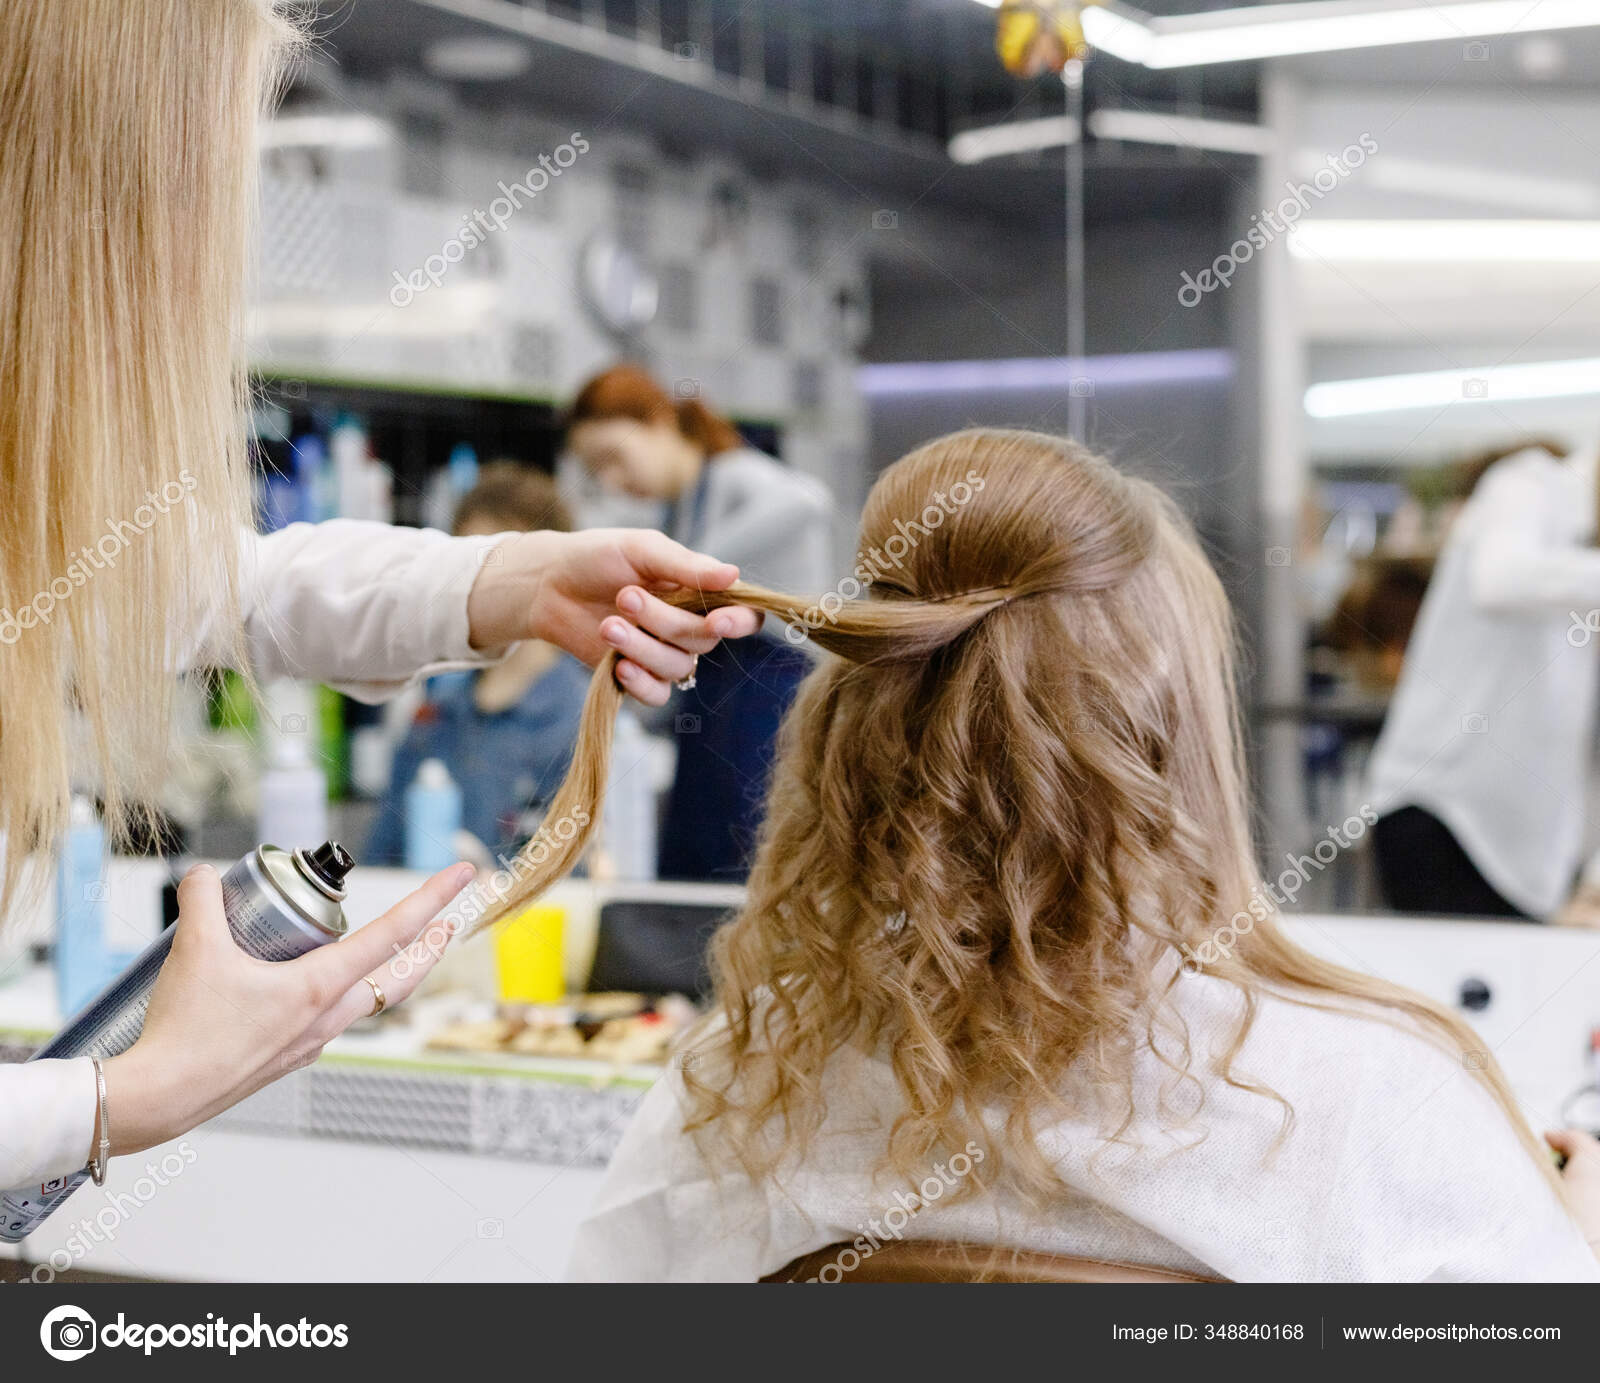 Hairstyle Back View Hairdresser Making Wedding Hairstyle Blonde Hair Woman  Stock Photo by ©beton_studio 348840168